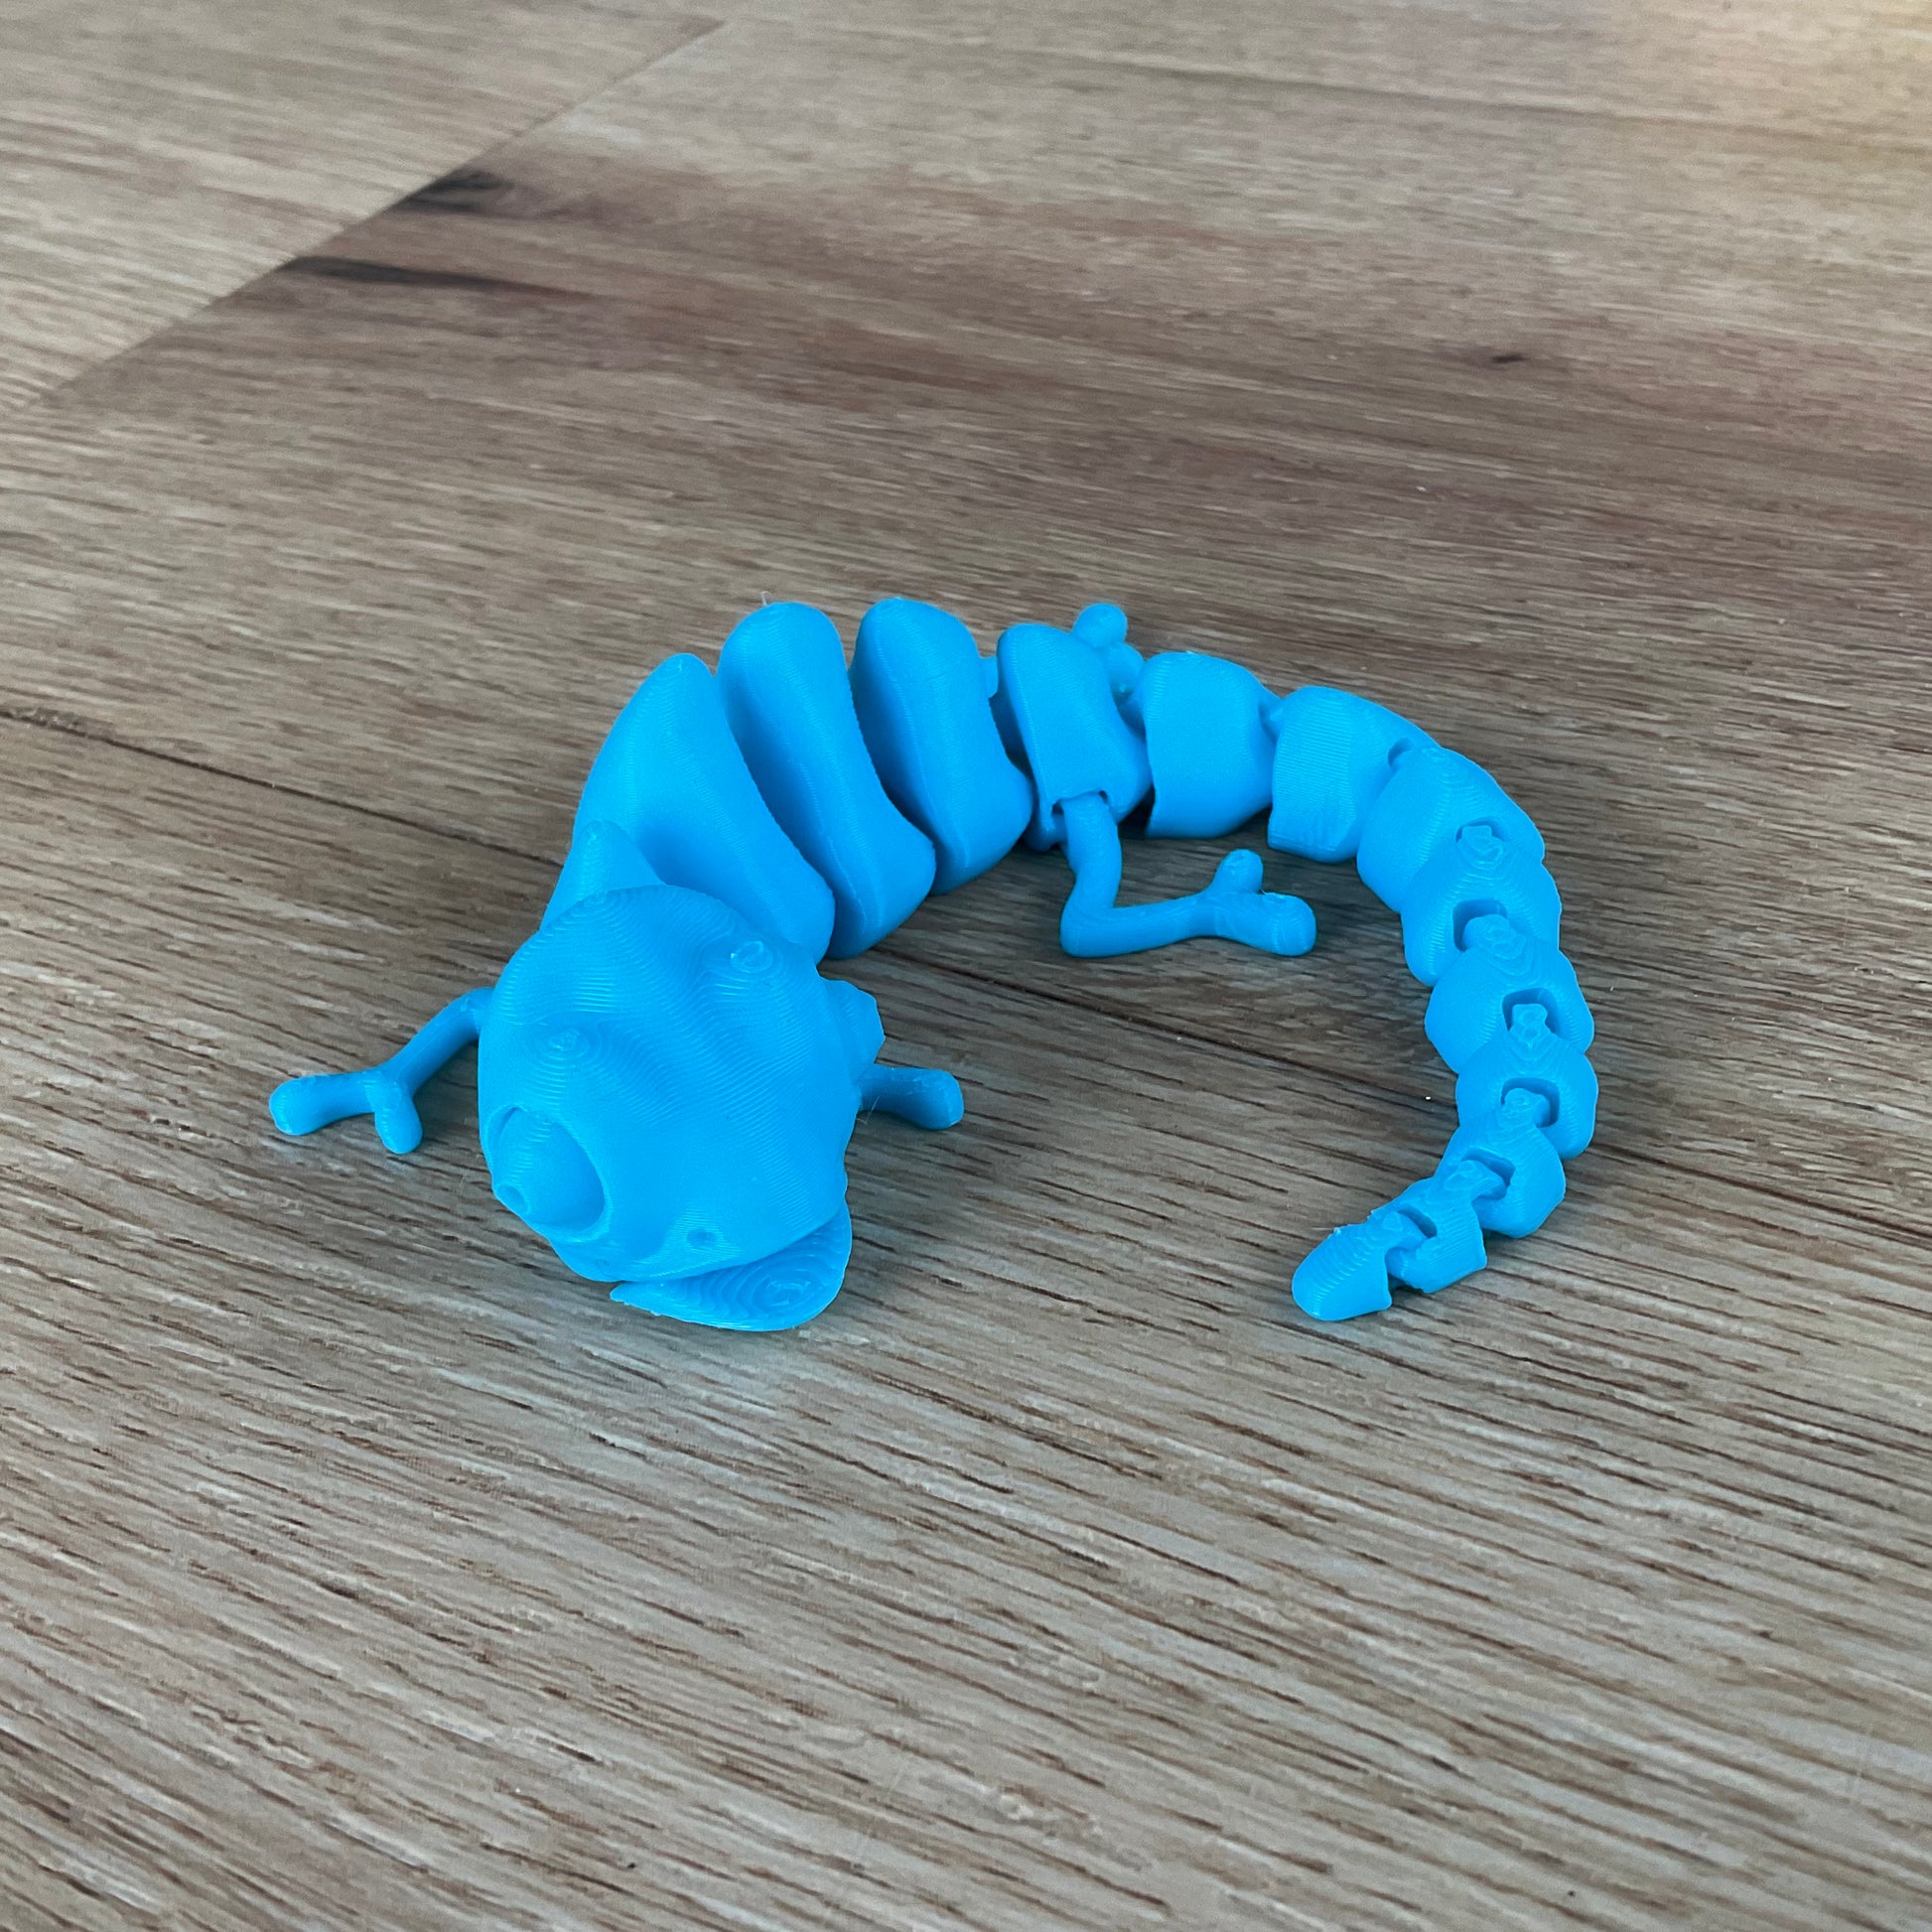 a picture of the Chameleon fidget toy in light blue.